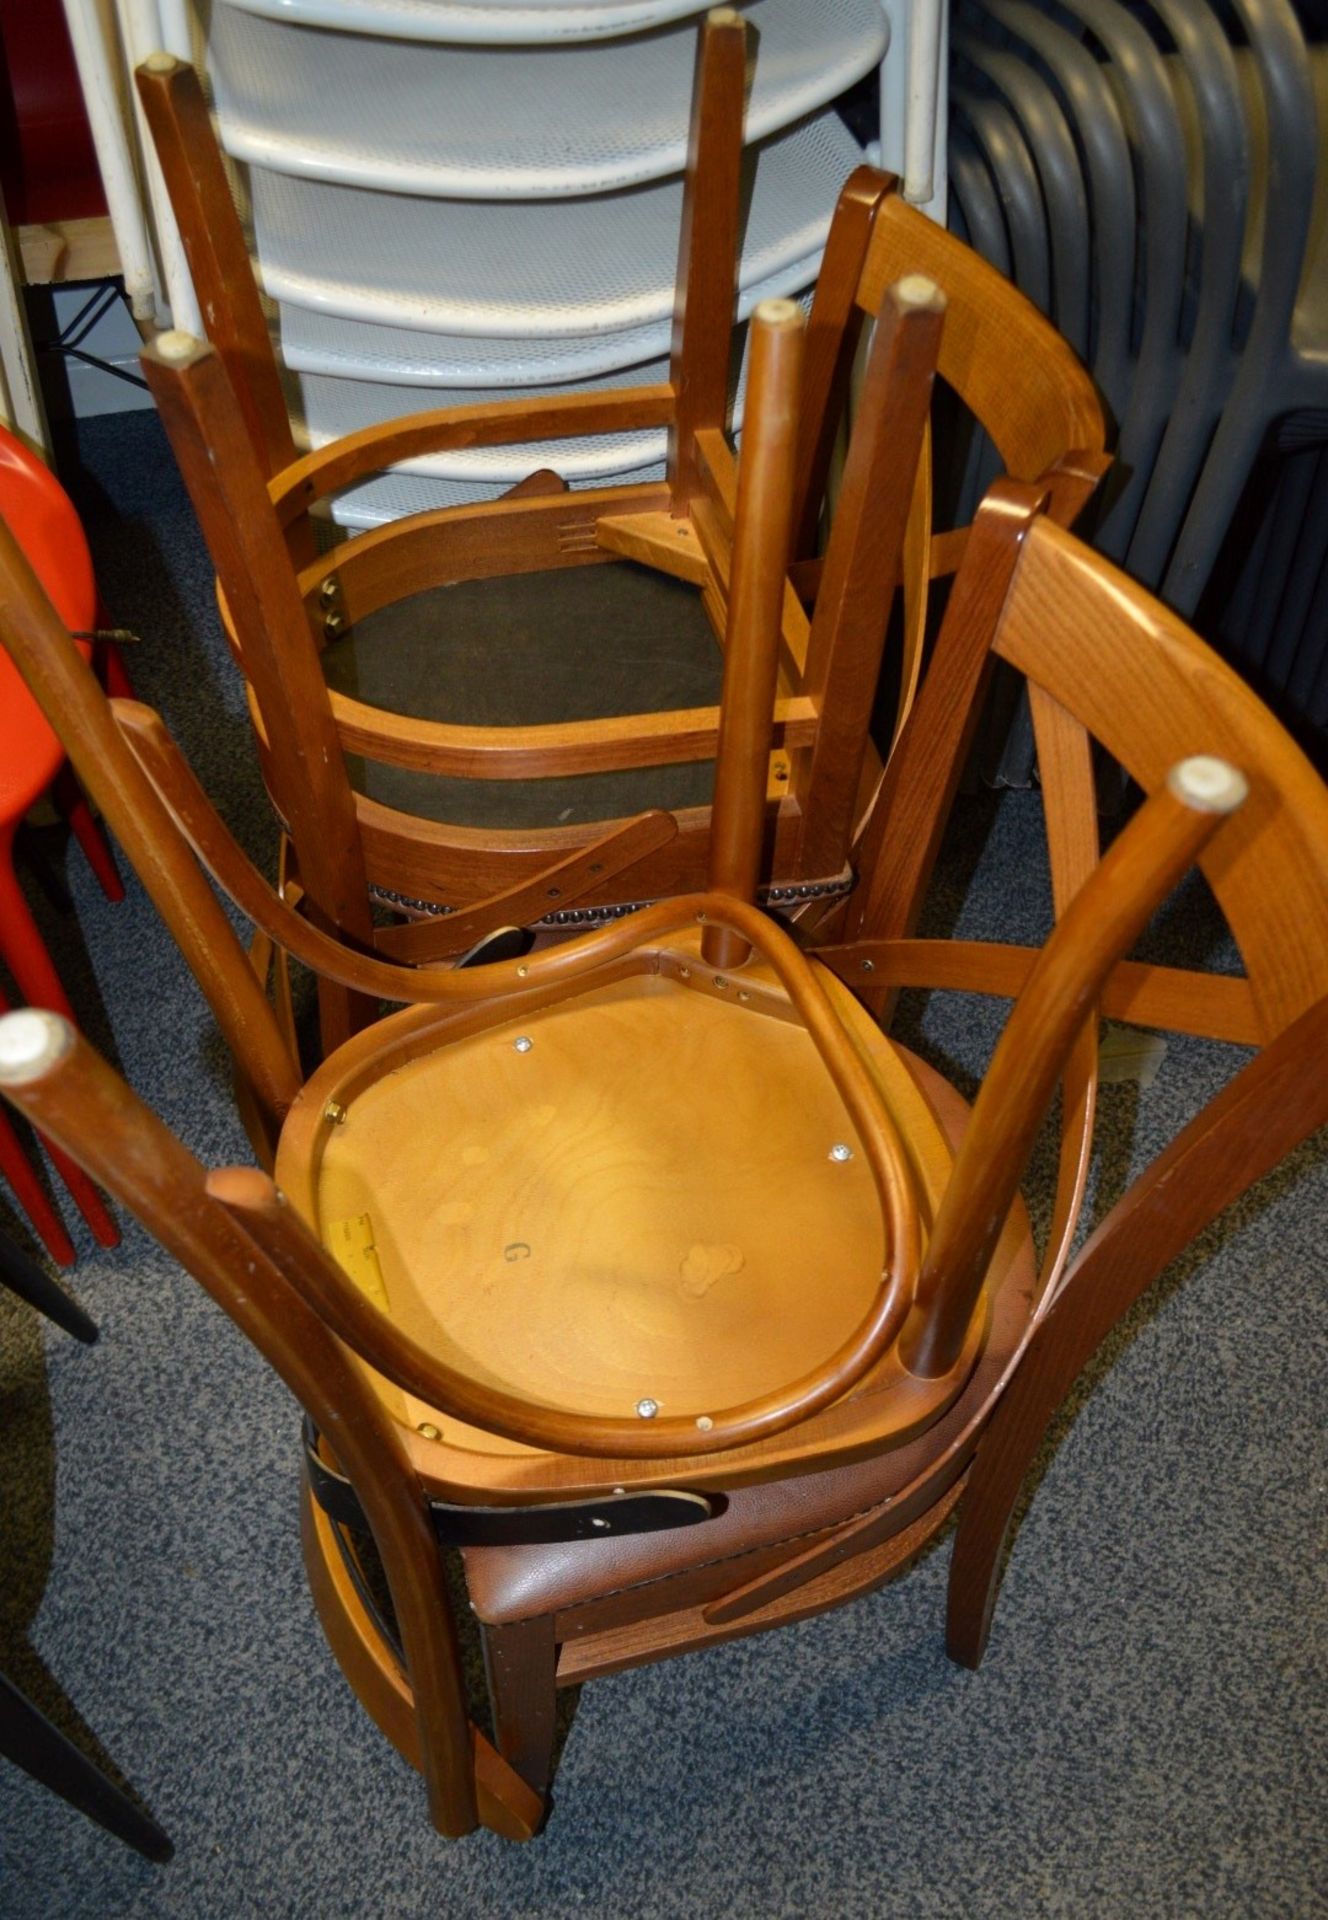 4 x Assorted Cross-Back Dining Chairs - Dimensions: W43 x D40 x H82 x Seat 46cm - Used - Ref614 - - Image 5 of 7